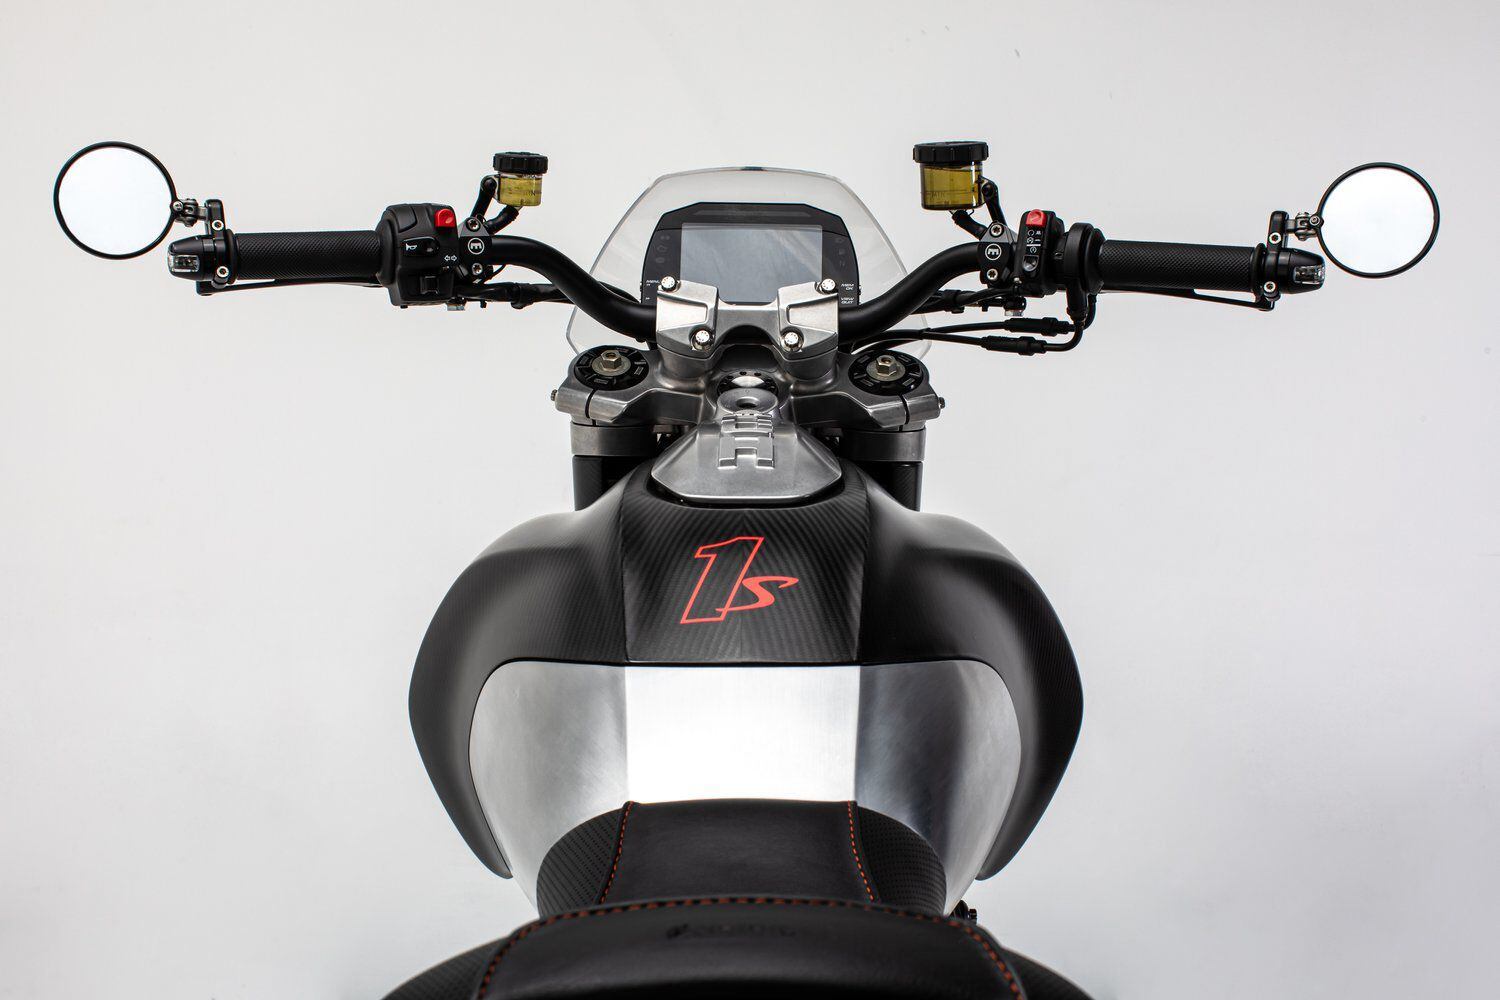 The 1s cockpit features a wide, low handlebar, and Arch’s in-house-designed TFT digital instrumentation.